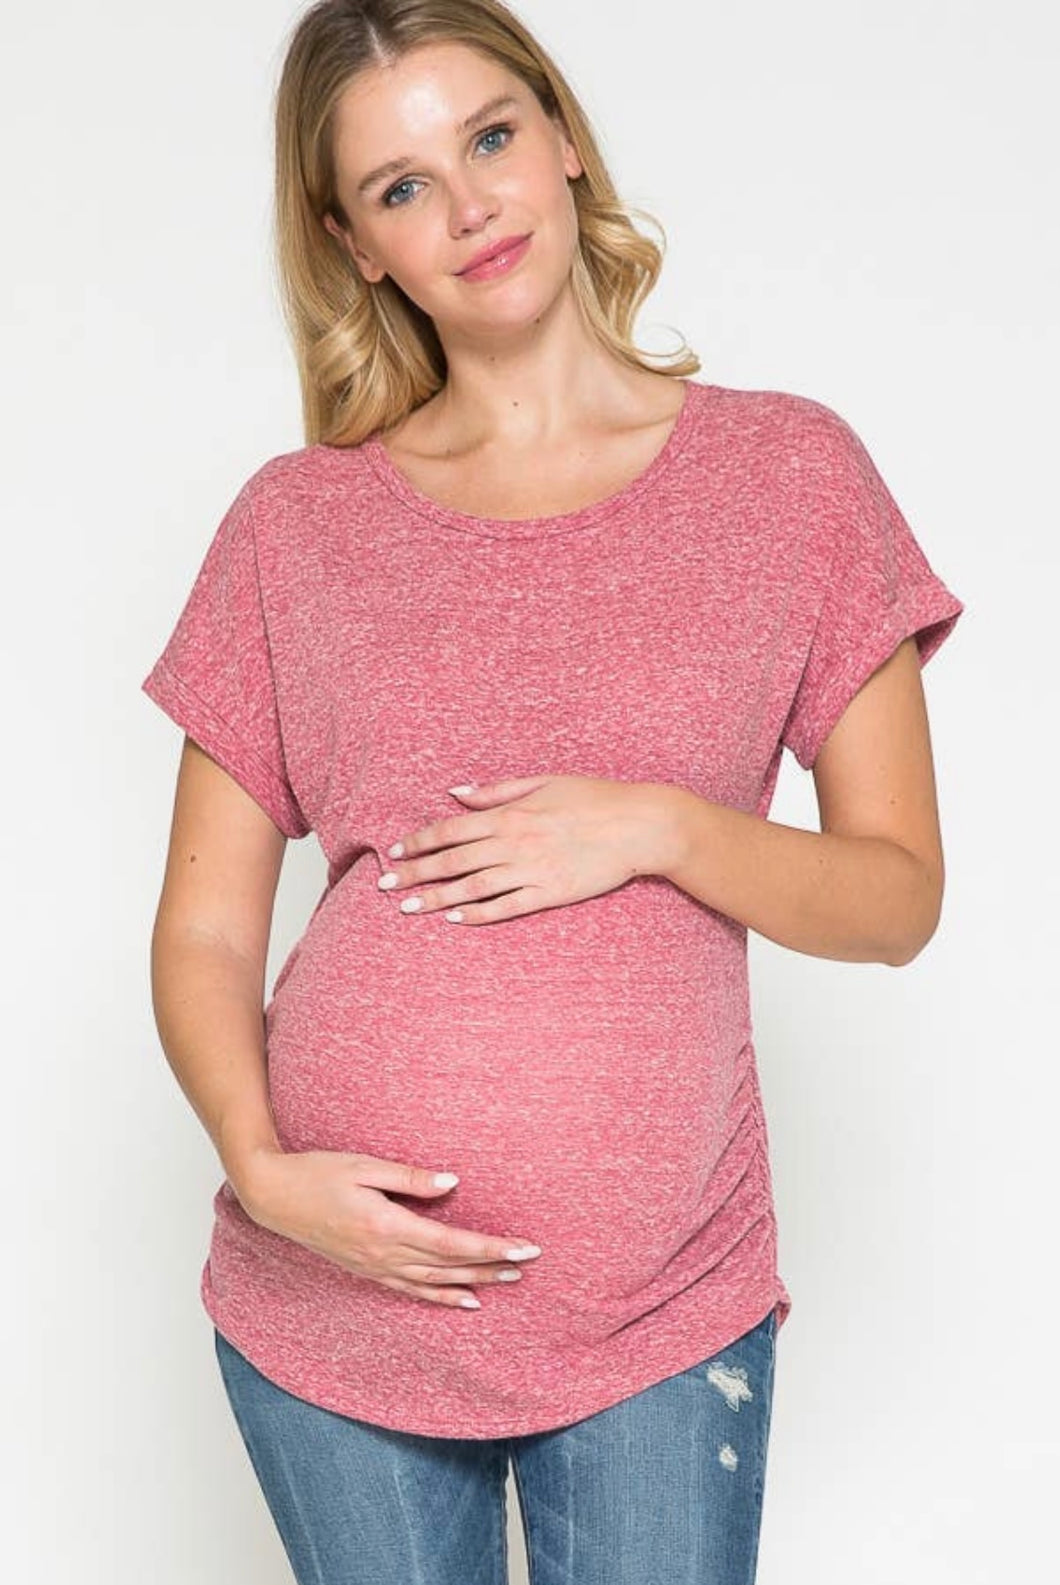 Berry Color Maternity Shirt